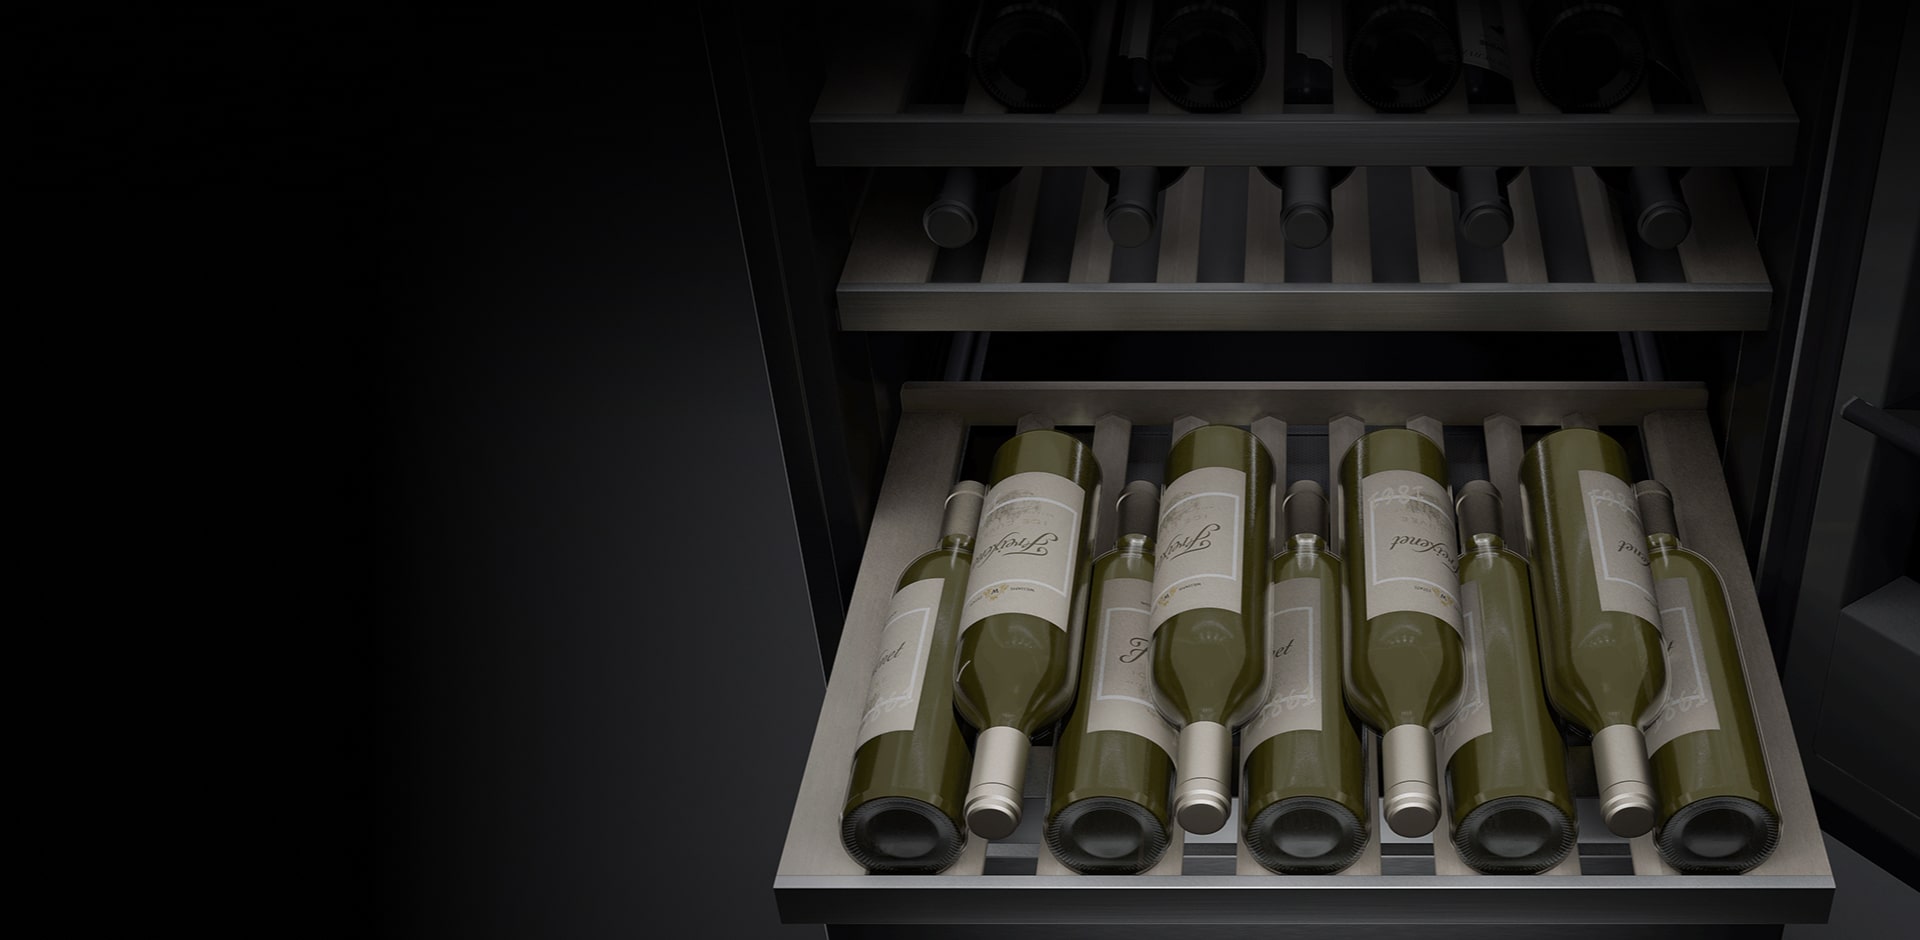 A close-up image of the inside of the wine cellar. Several bottles of wine are stored on the shelves, and the center shelf has been pulled out so that the wines can be easily viewed and accessed.